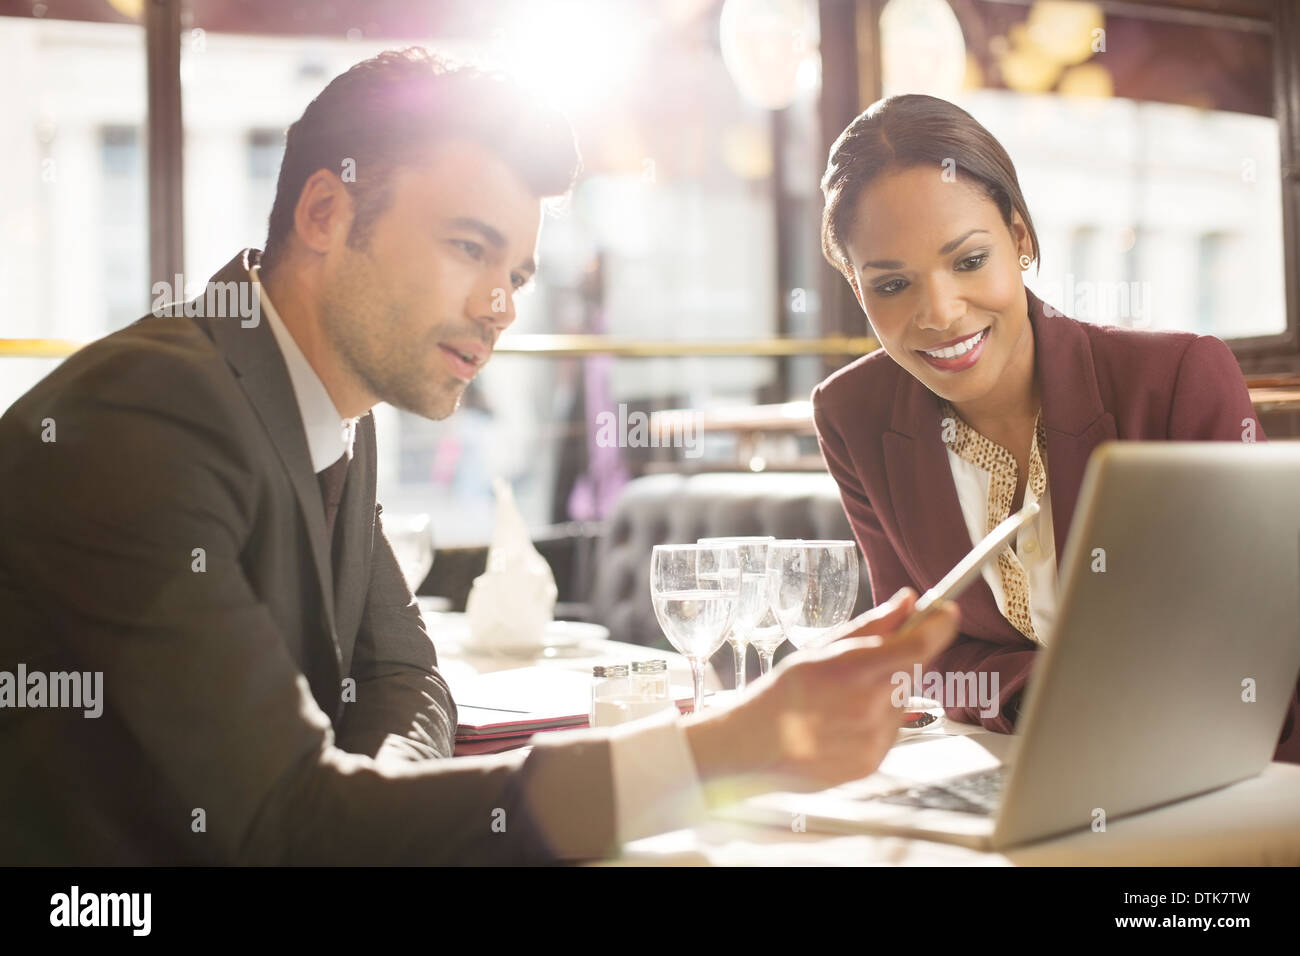 Business people working in restaurant Stock Photo